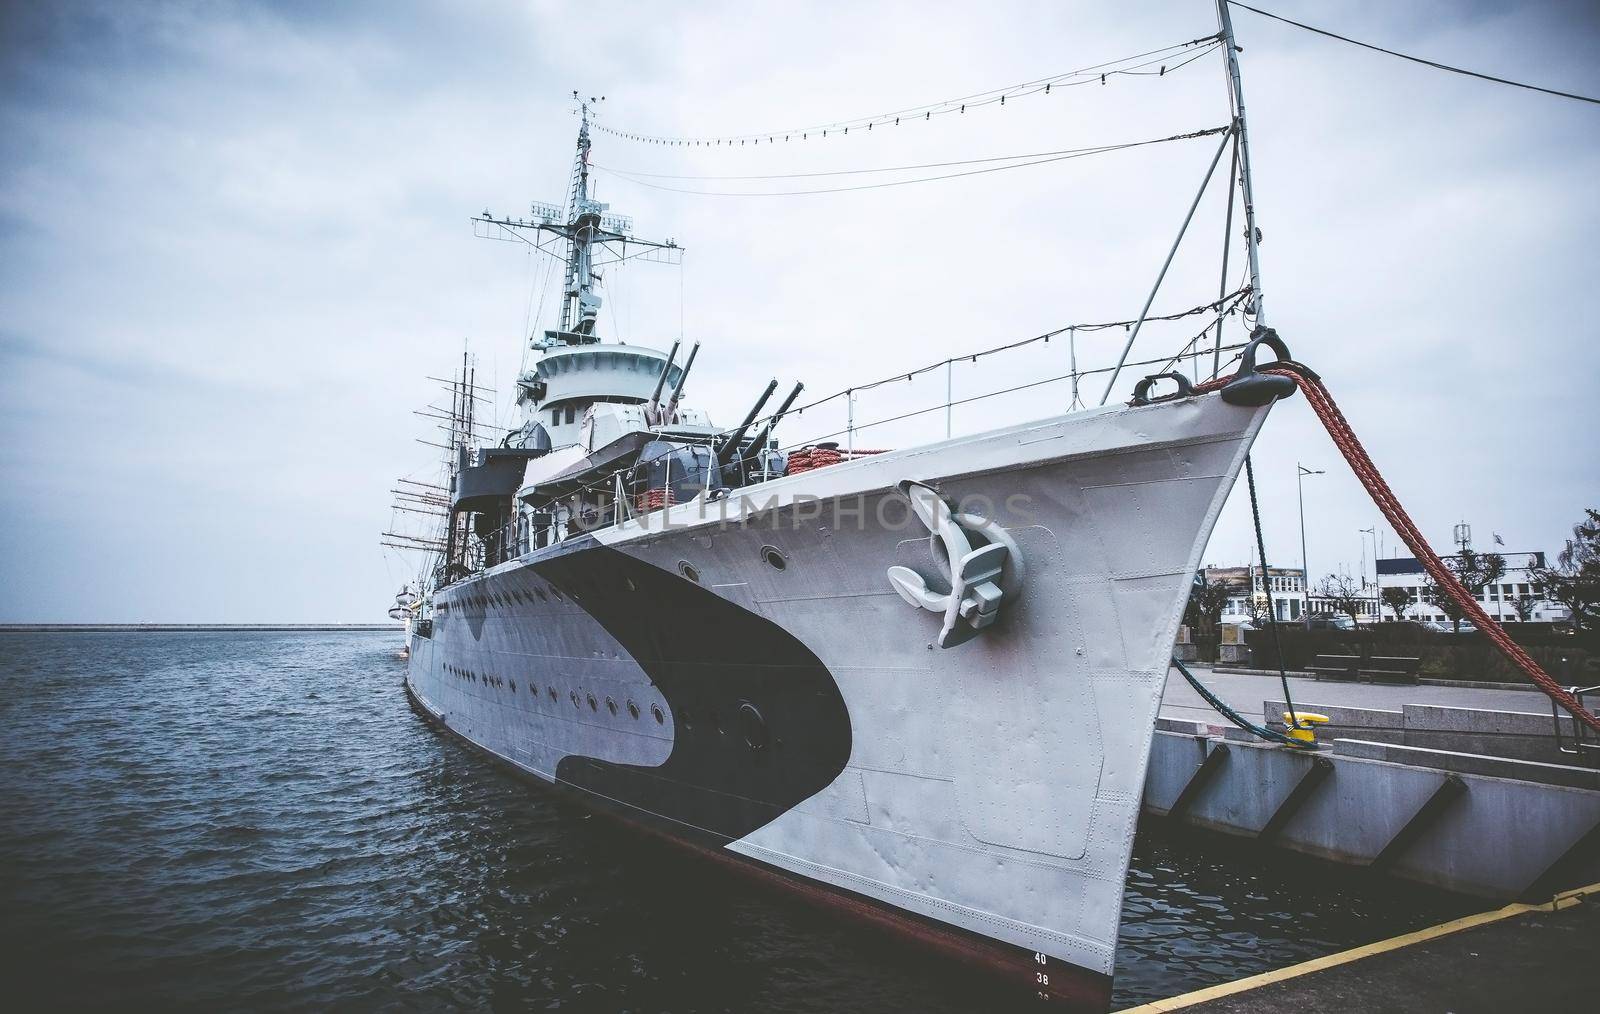 Warship destroyer serving in the Polish Navy during World War II, preserved as a museum ship in Gdynia